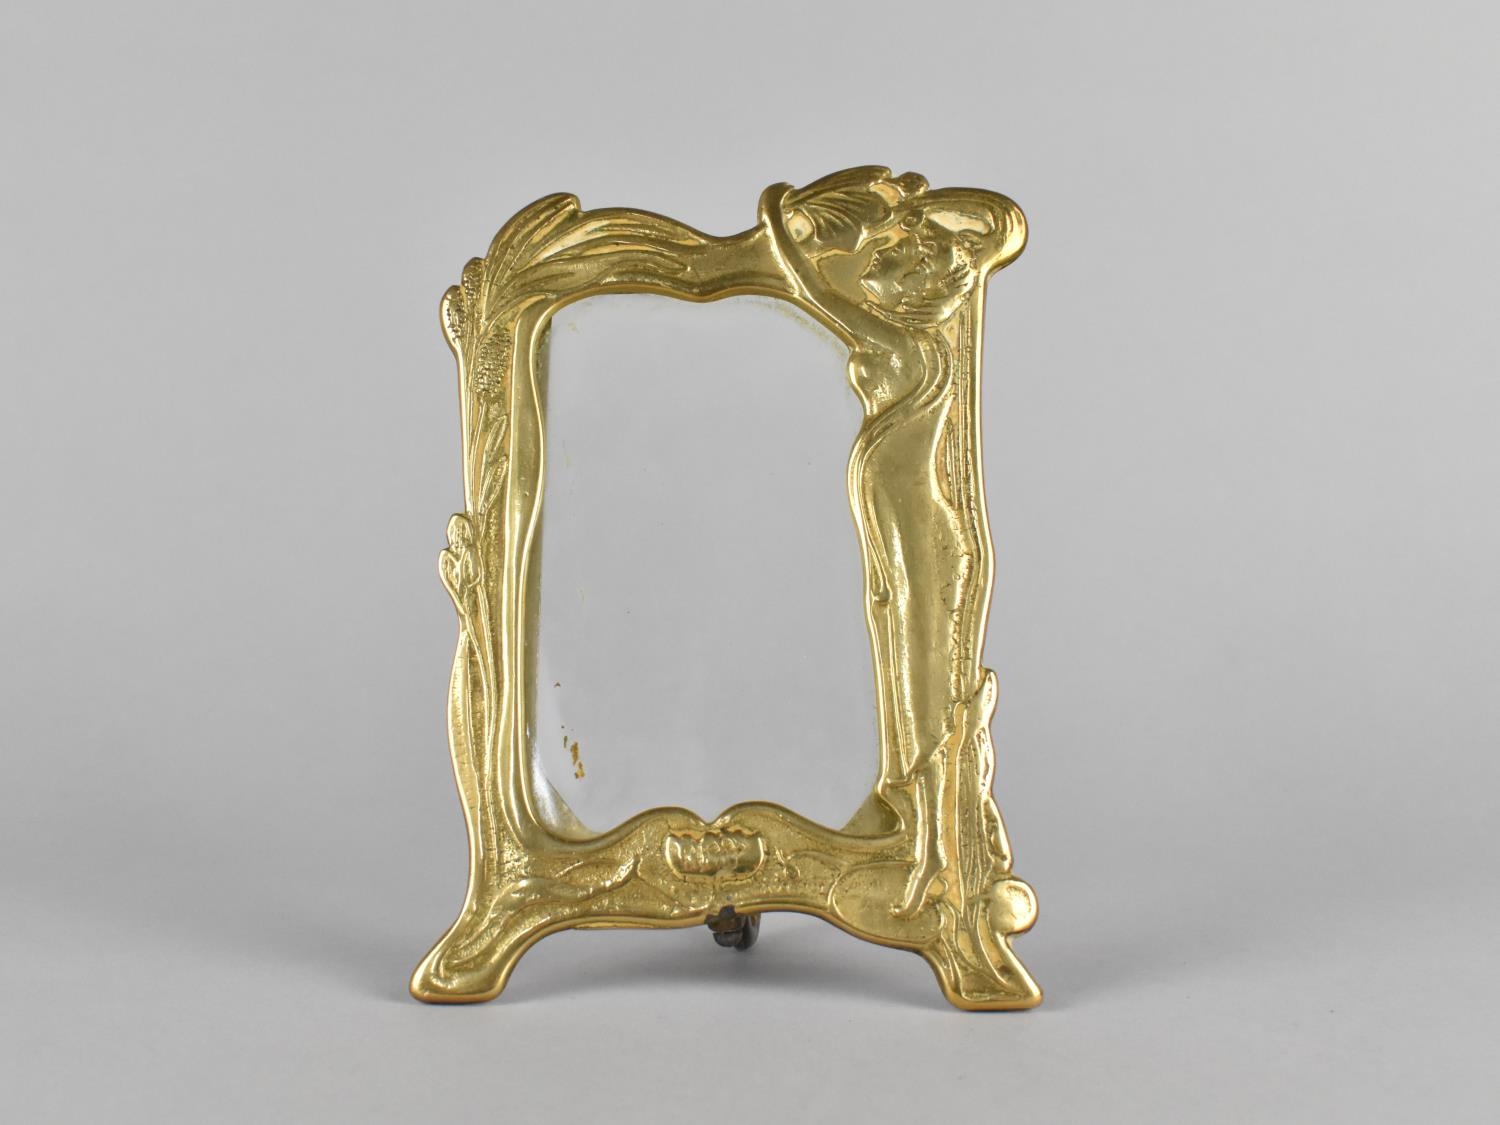 A Cast Brass Photo Frame in the Art Nouveau Style with Whiplash and Maiden Design, Hinged Support,